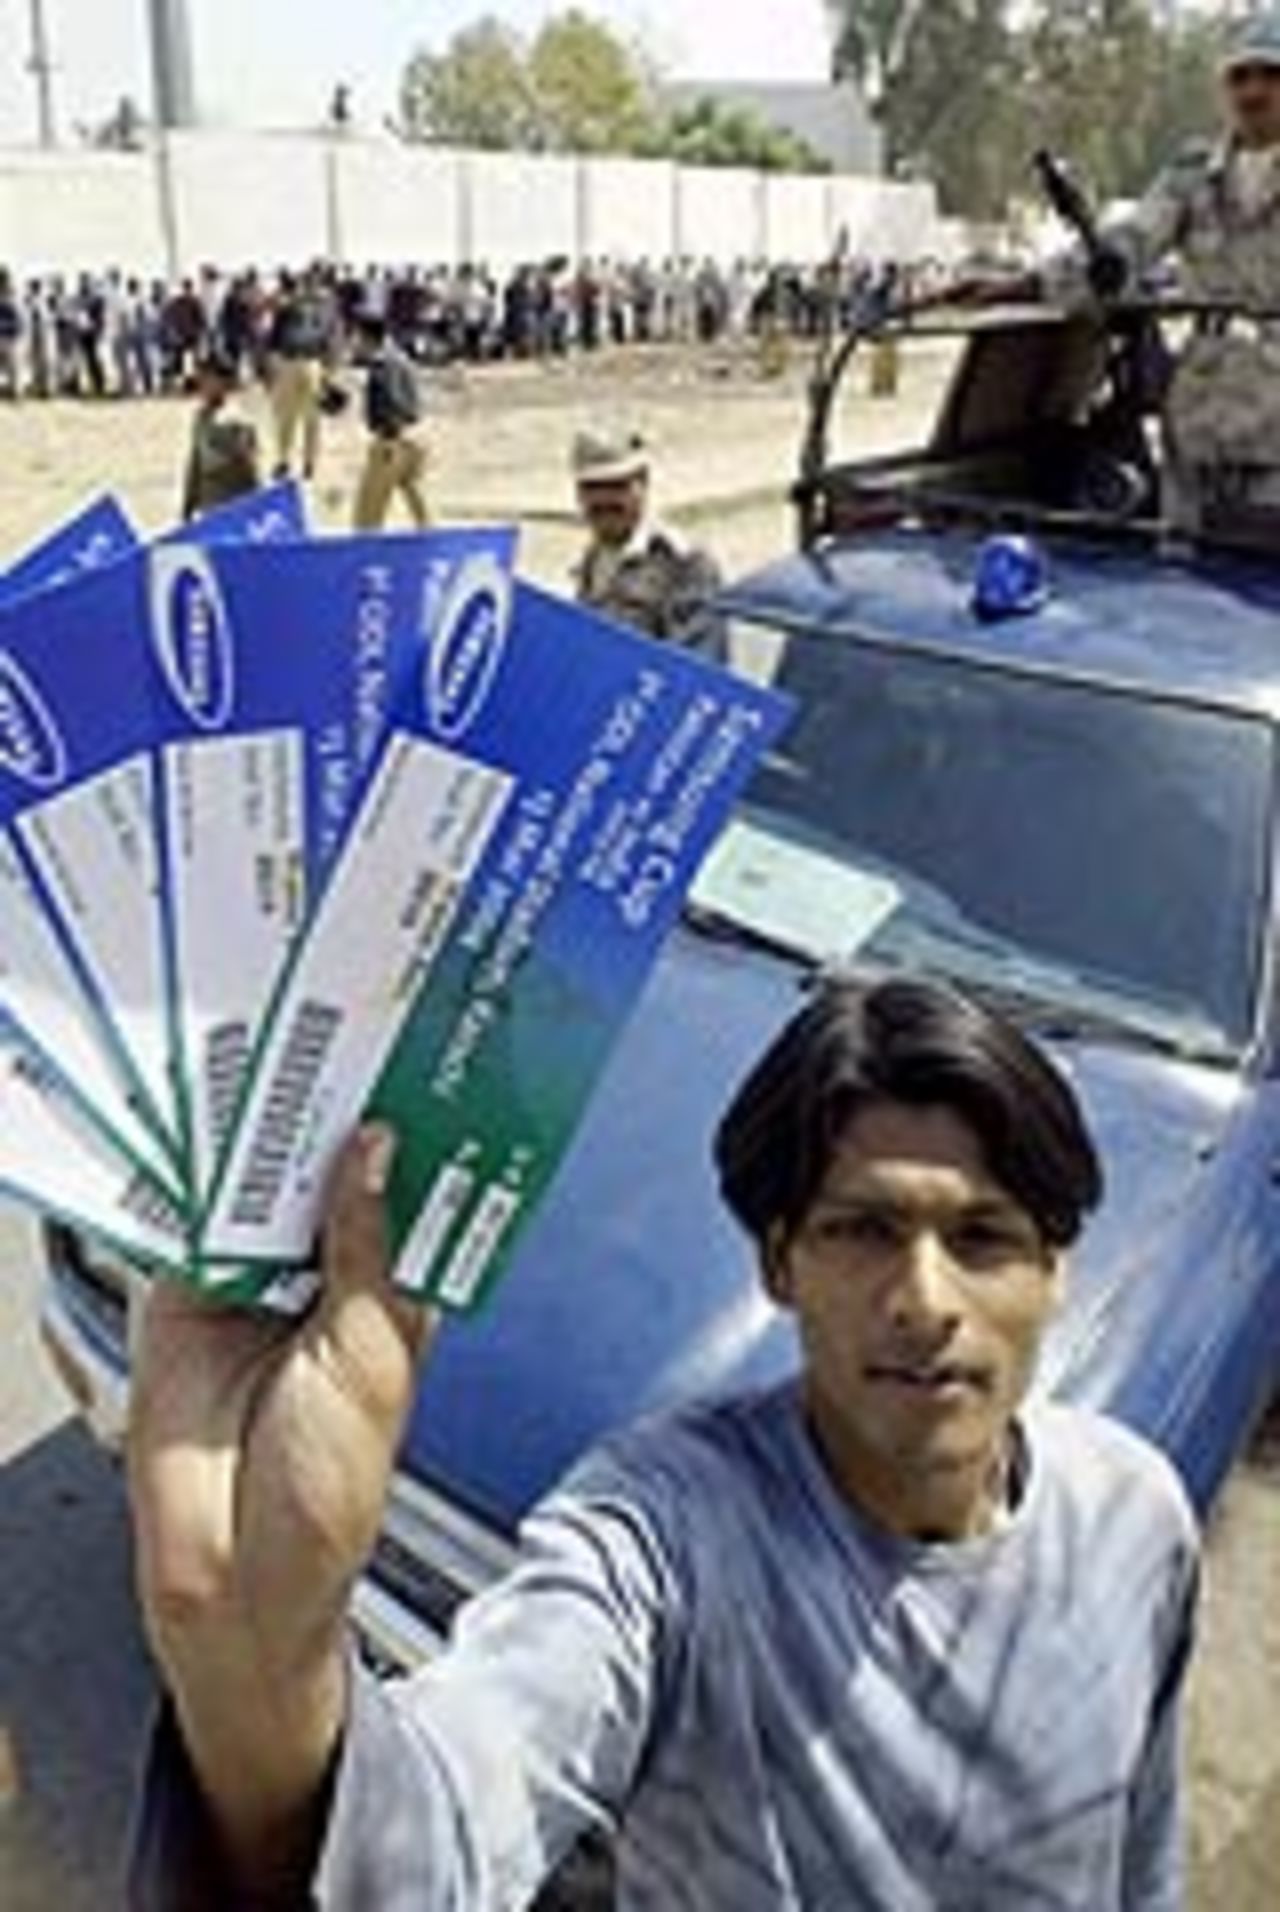 A cricket fan in Karachi with tickets for the first ODI between India and Pakistan, March 8, 2004